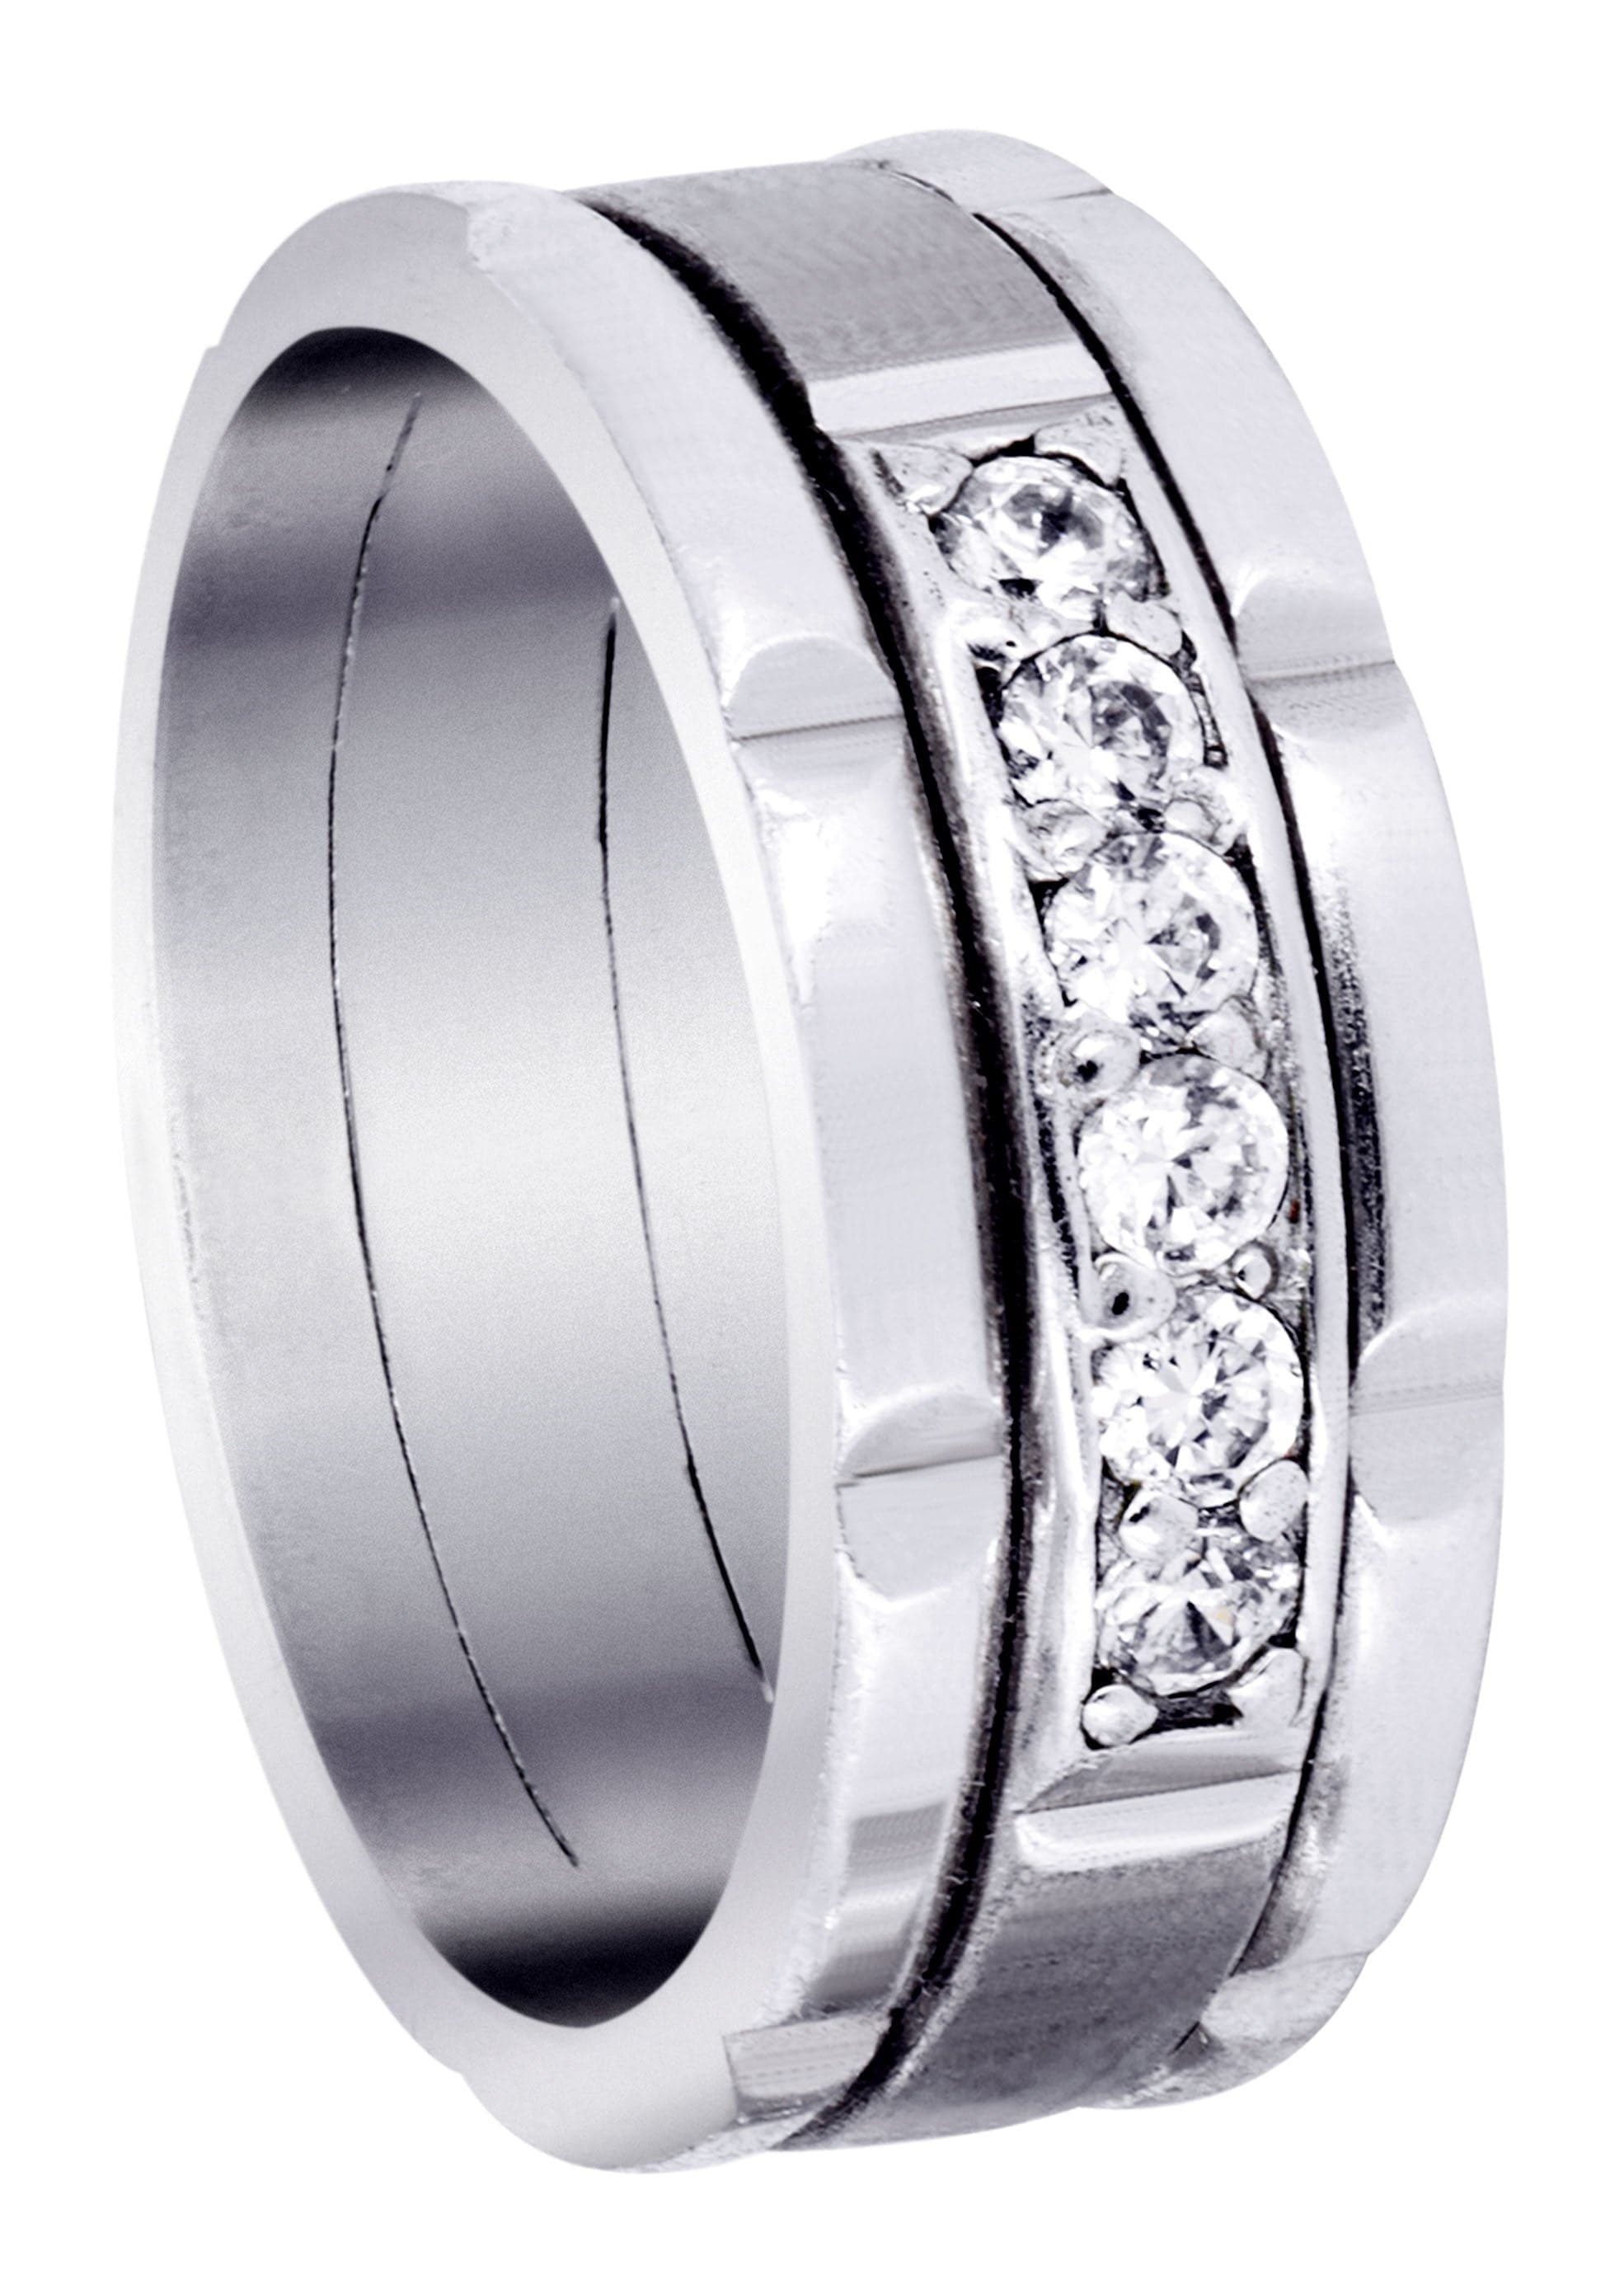 Male Rings Stainless Steel, Mens Engagement Rings Comfort Fit Groove Bands  Ring Size 7 | Amazon.com